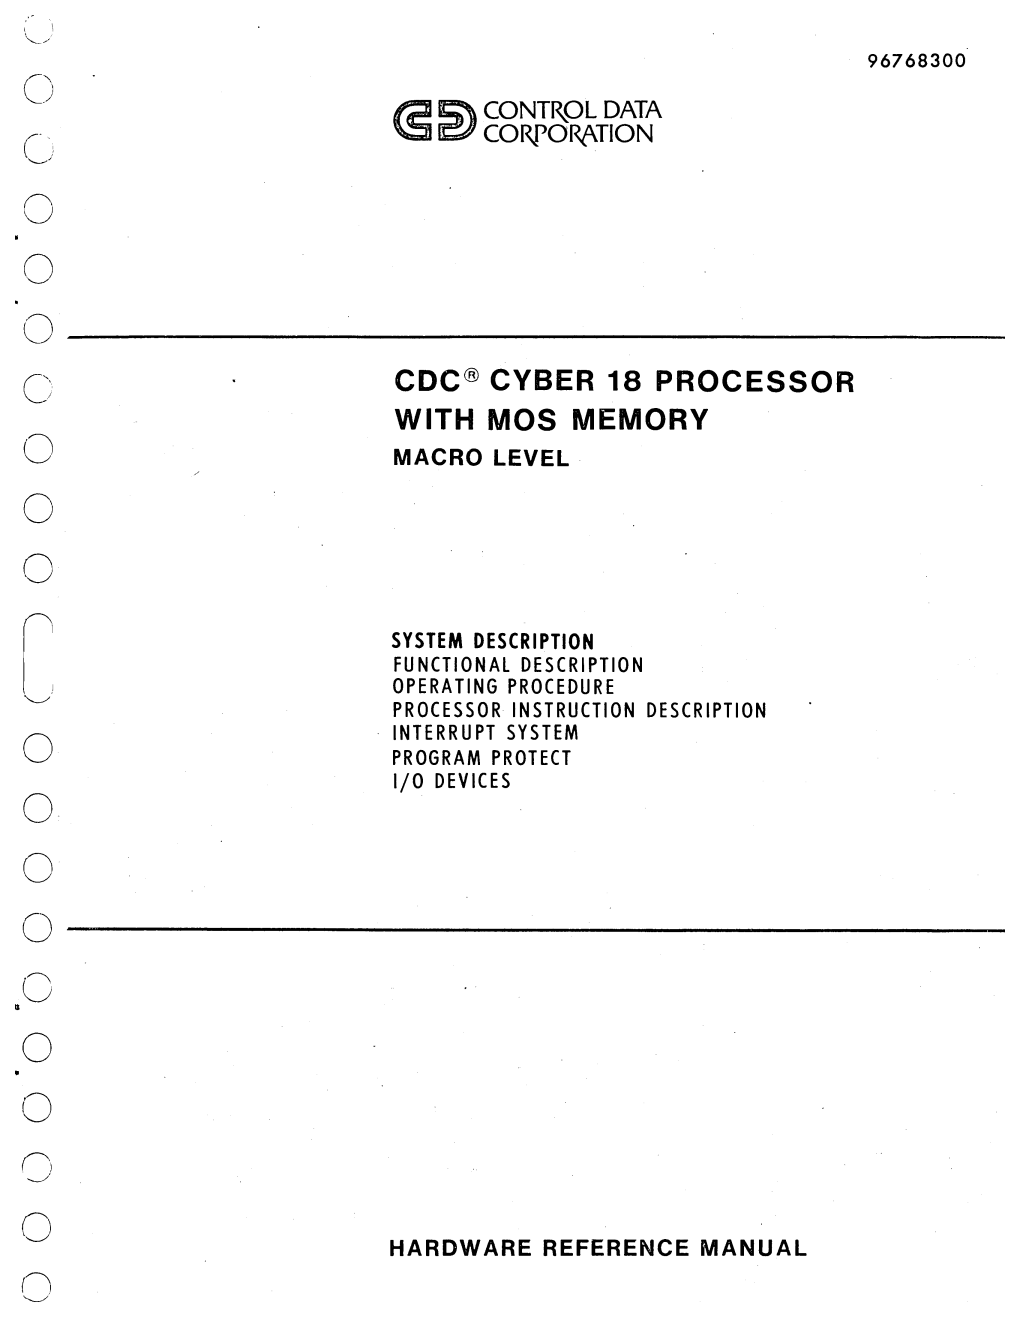 Cdc@ Cyber 18 Processor with Mos Memory